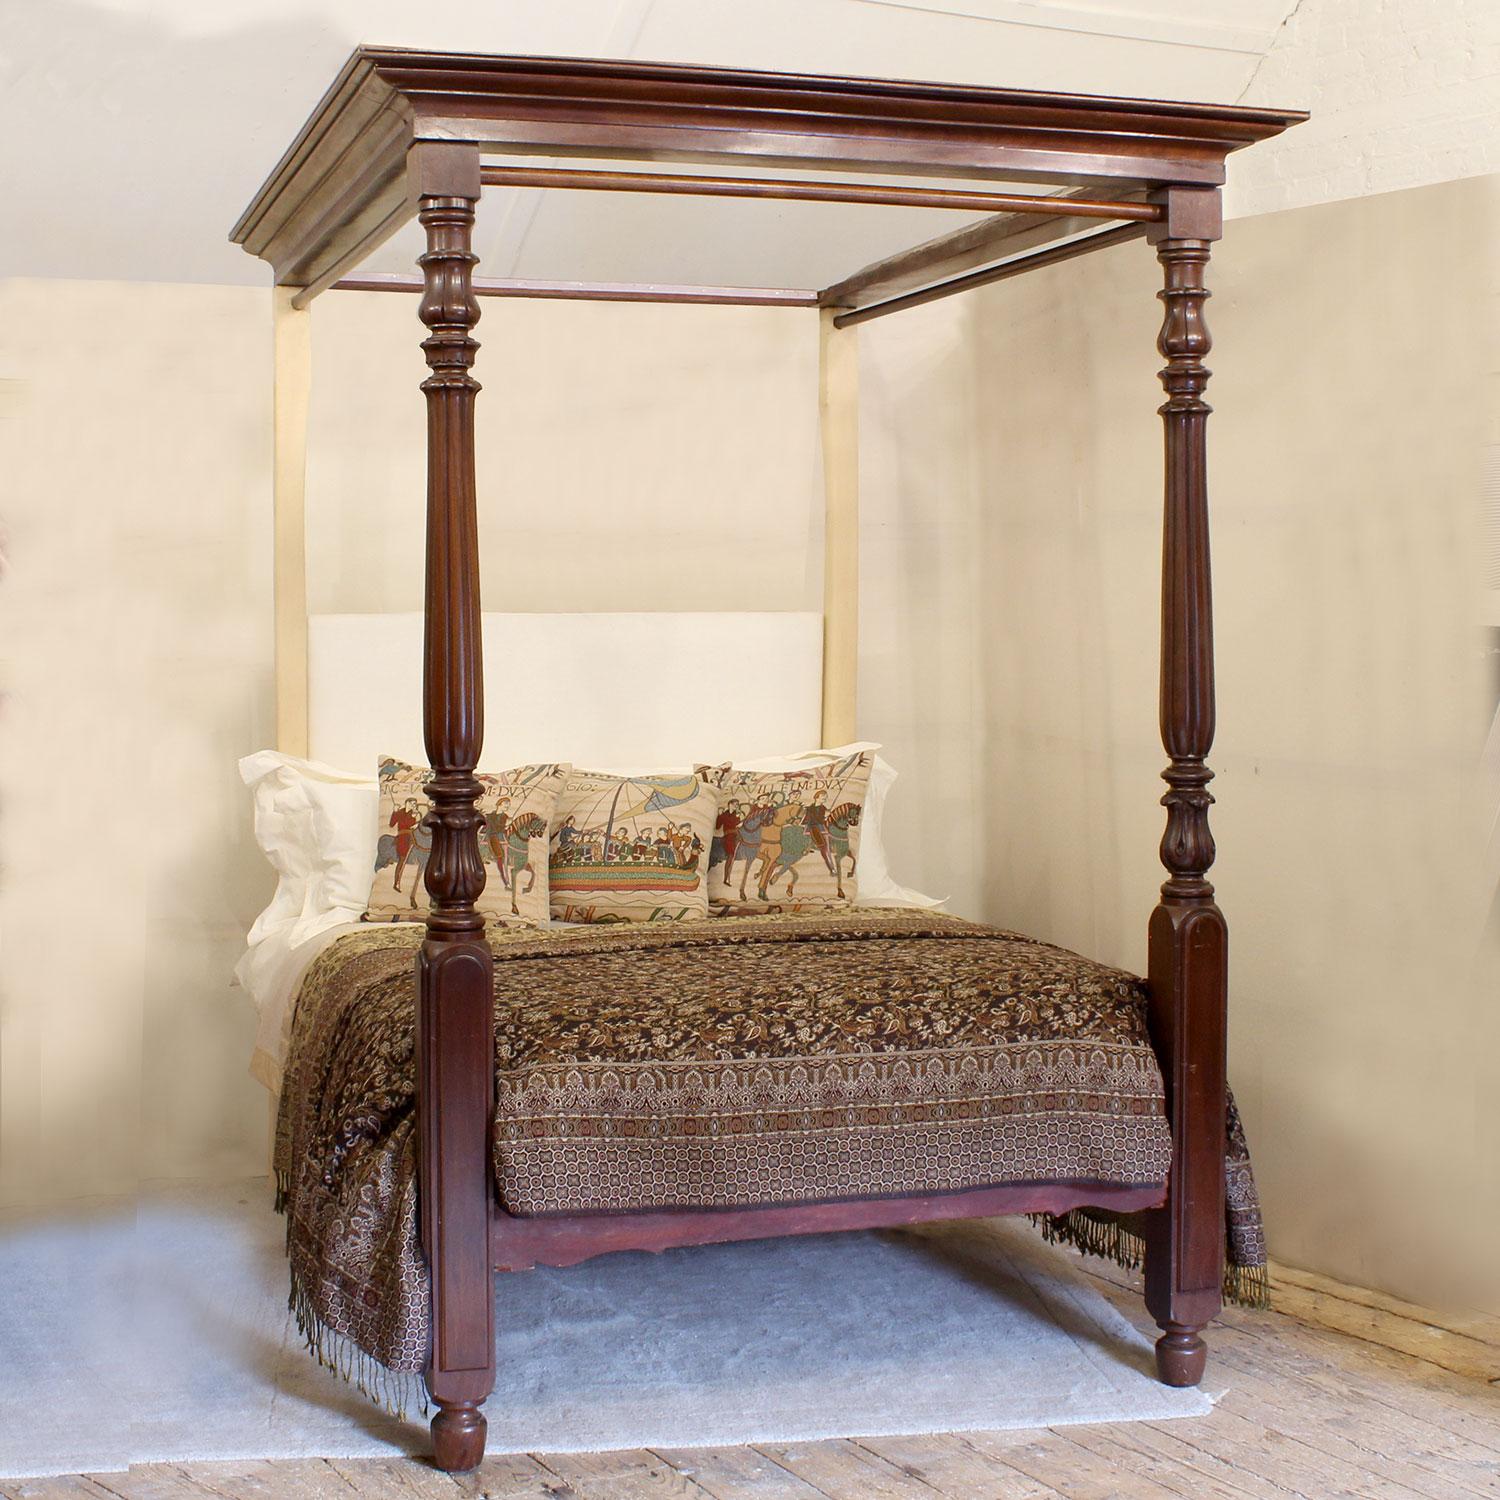 An early Victorian mahogany four poster bed with fine front posts and corniced canopy with hanging rails. This four poster bed is almost entirely original from the mid-Nineteenth Century and is an exceptional piece. 
The upholstered back board can